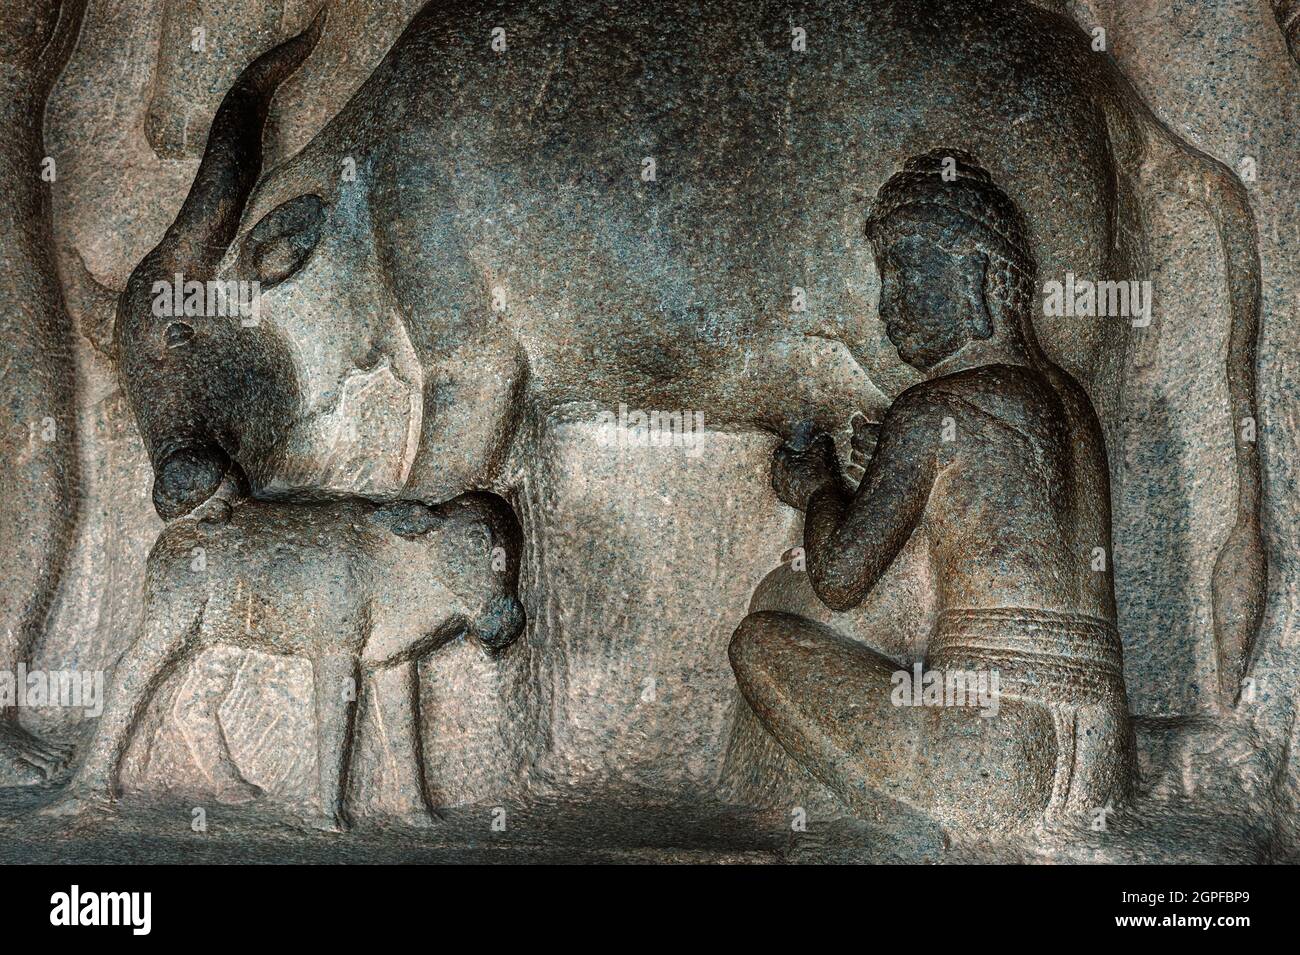 Ancient base-relief cave sculptures of cow, calf, and man milking the cow, all on large rock formation in Mamallapuram, Tamil Nadu, India. Stock Photo